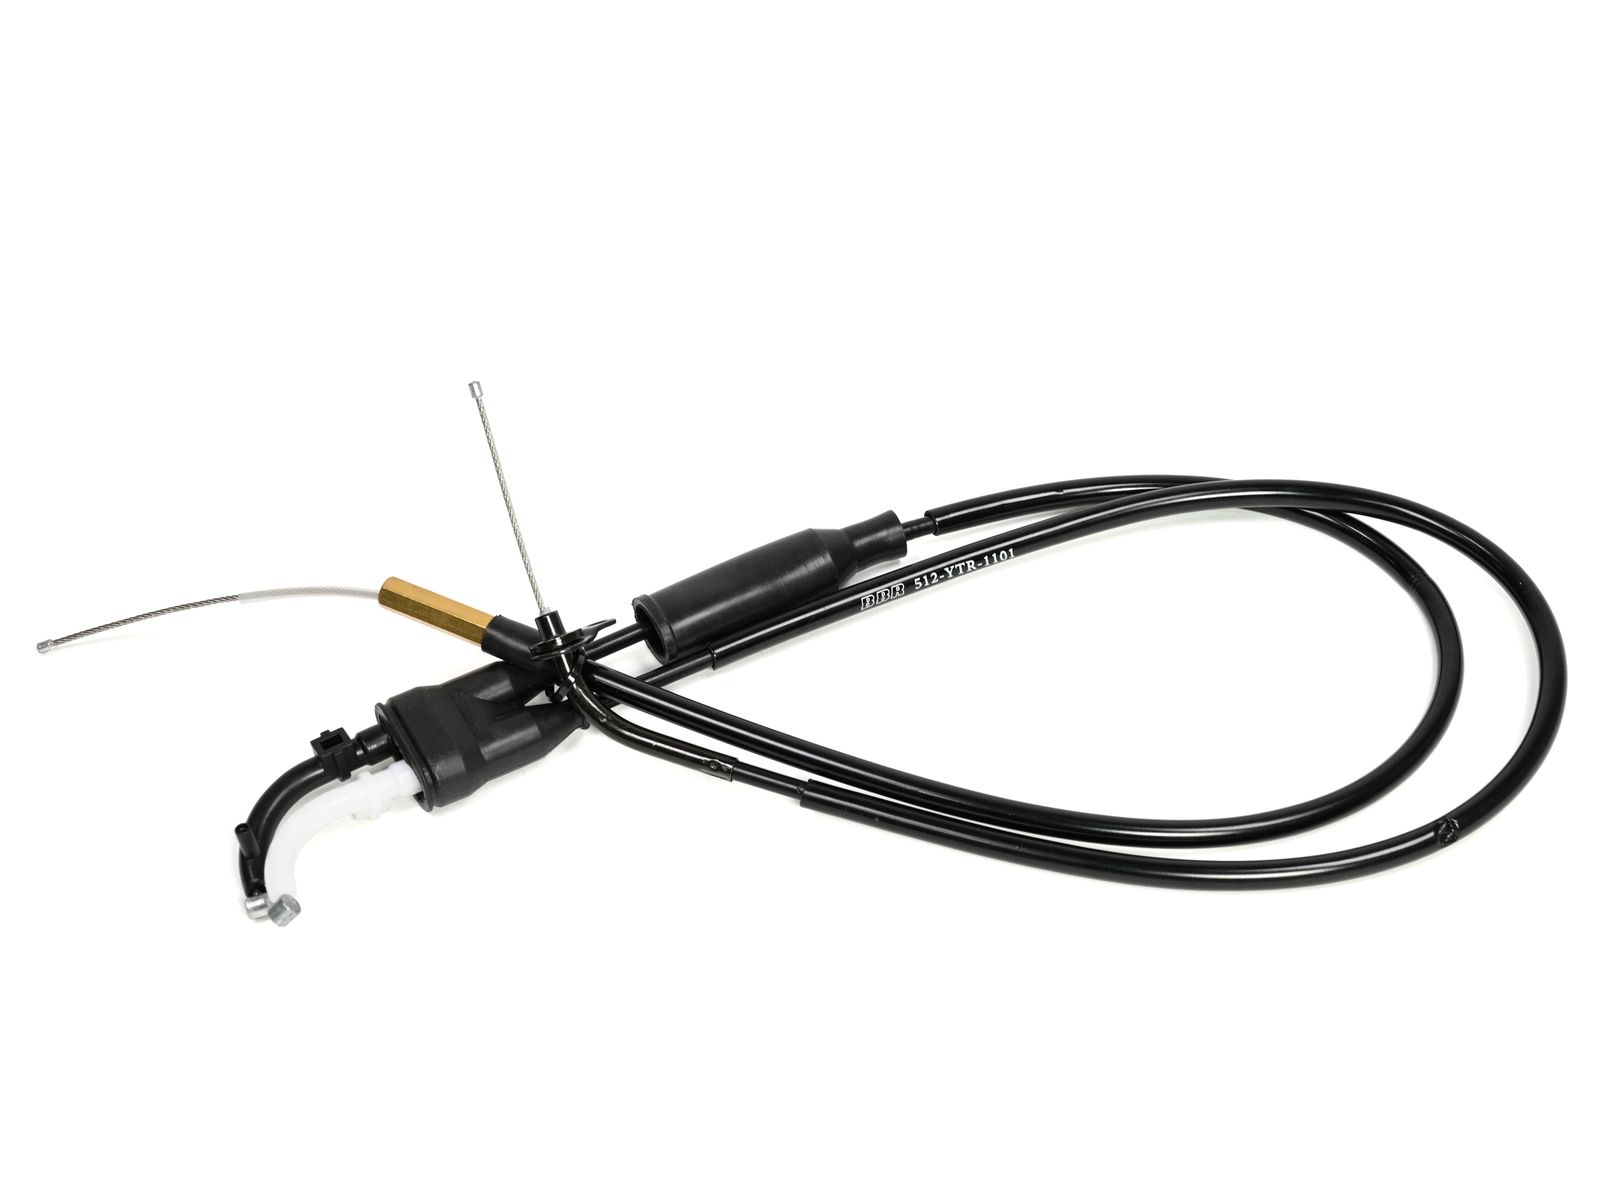 BBR Throttle Cable - TTR110 Extended